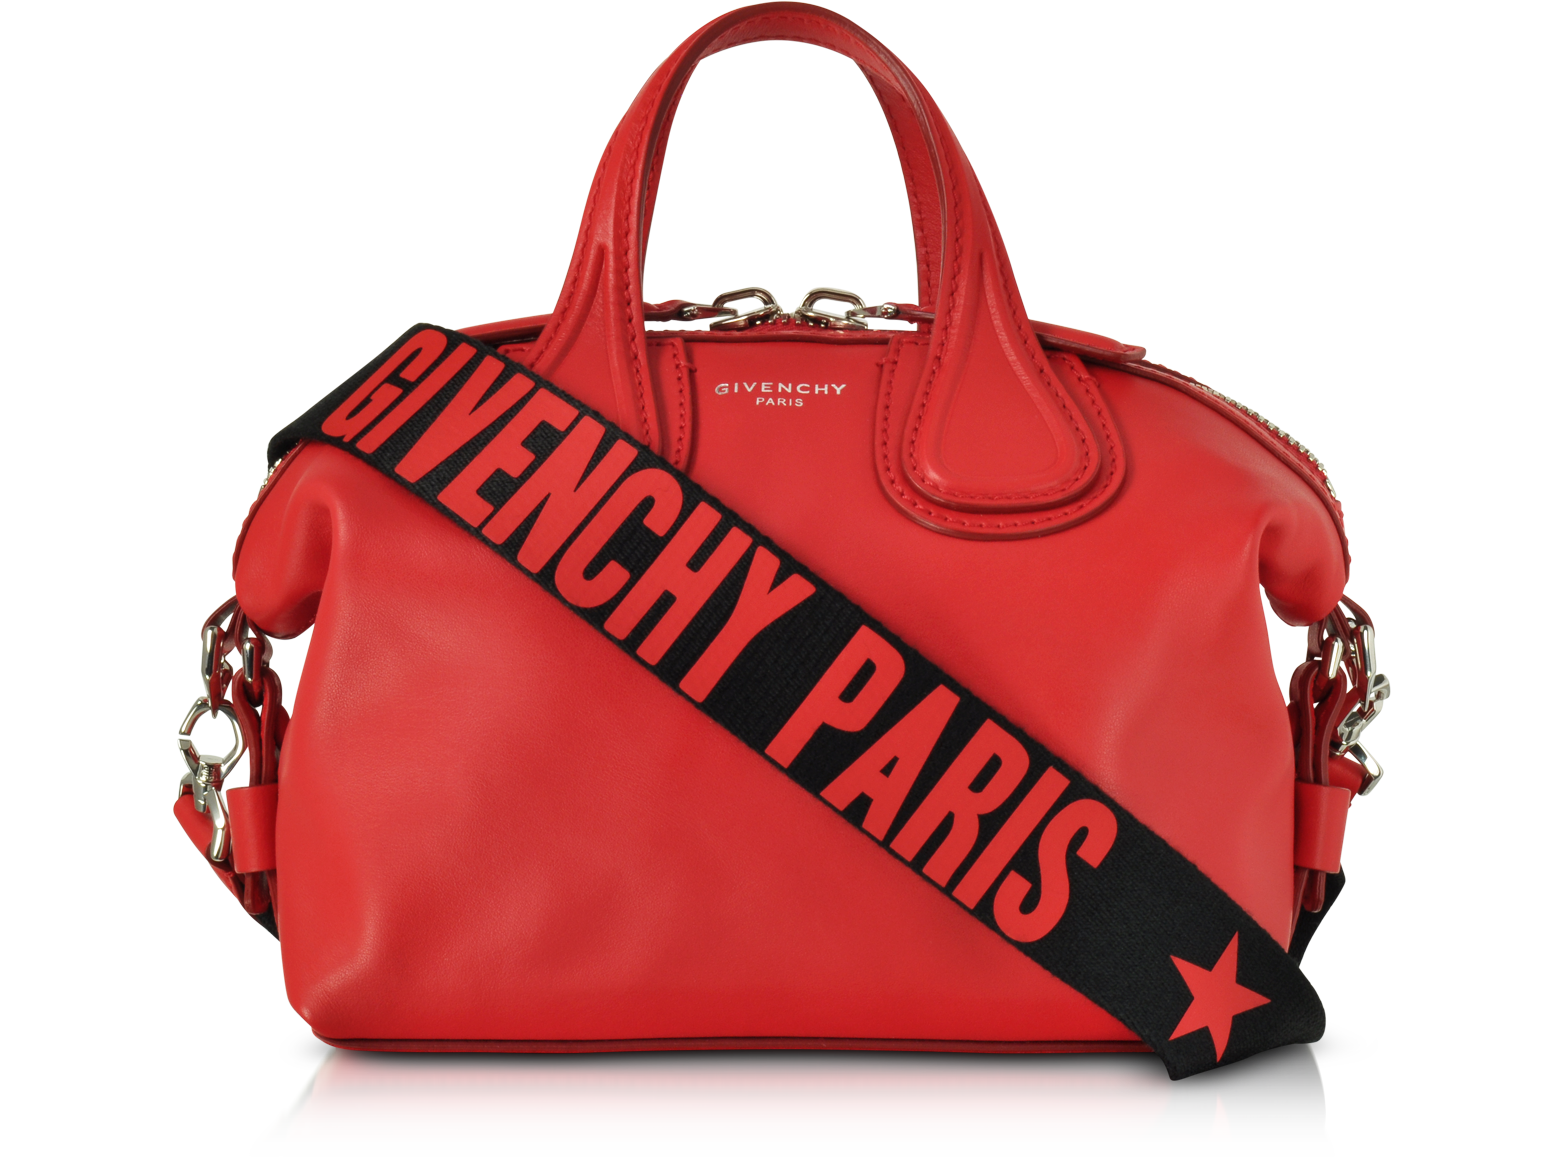 givenchy bag red